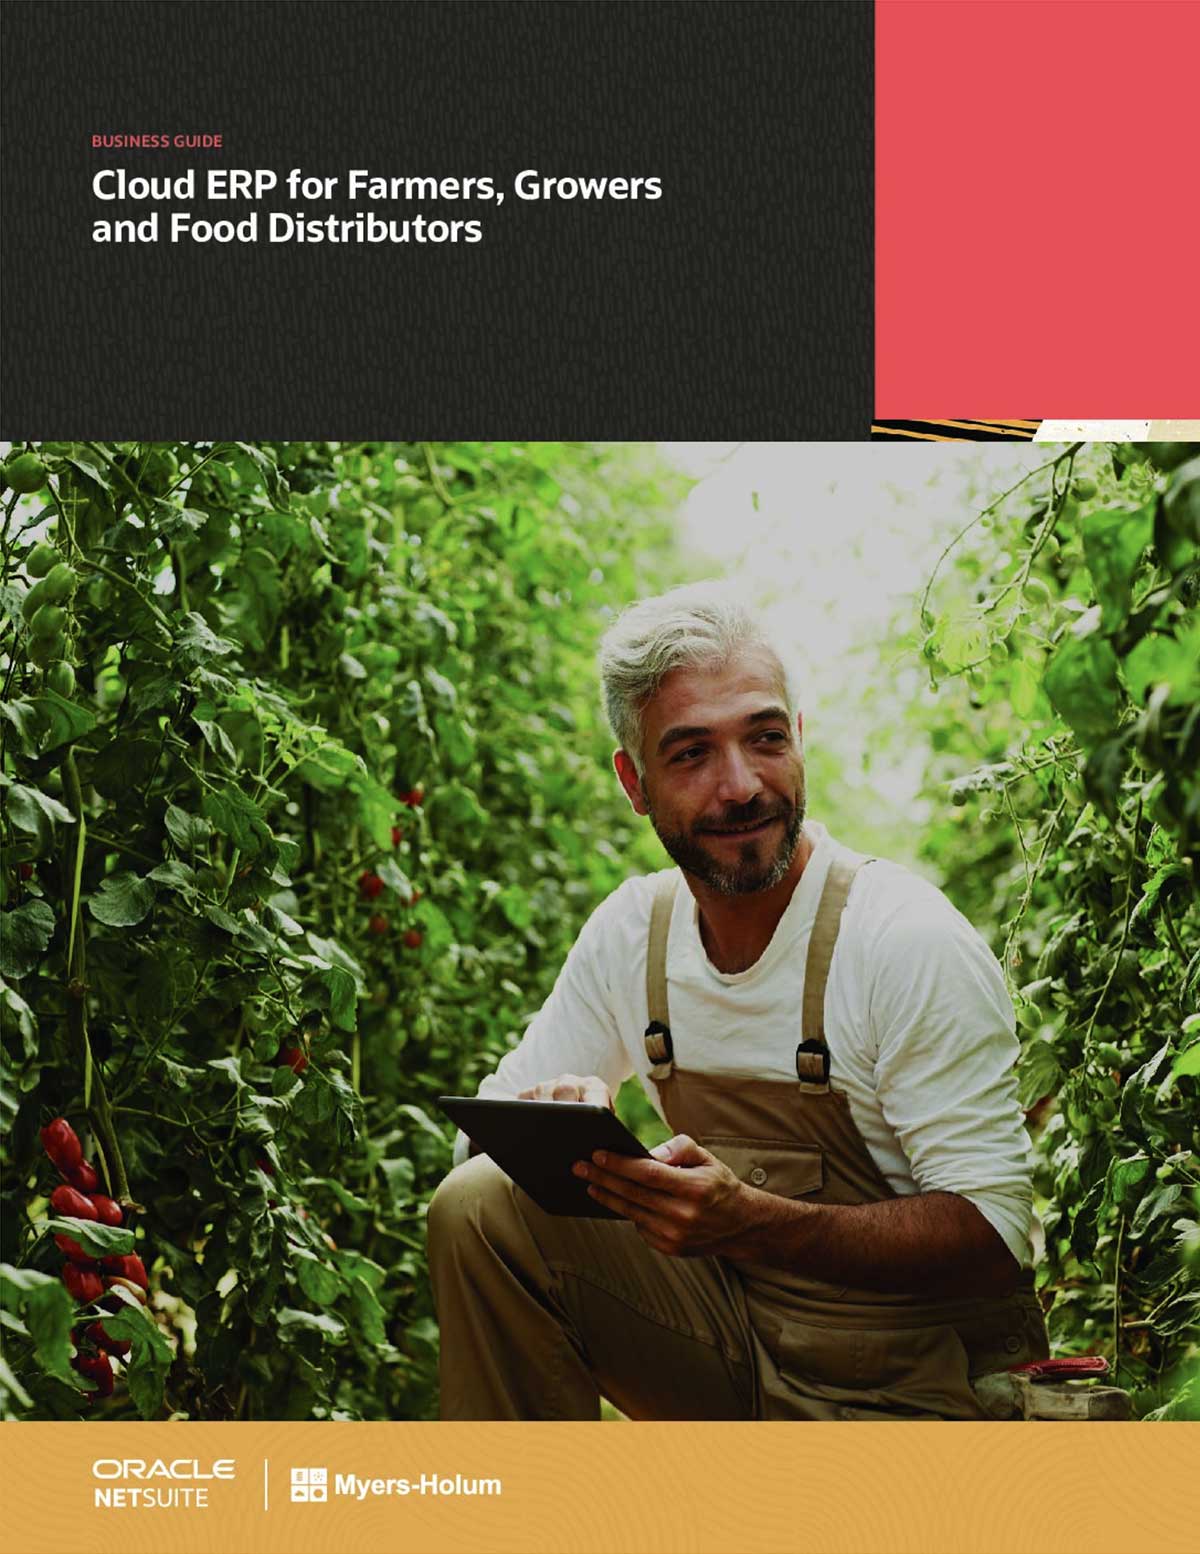 MHI Agriculture Food Growers Industry White Paper cover